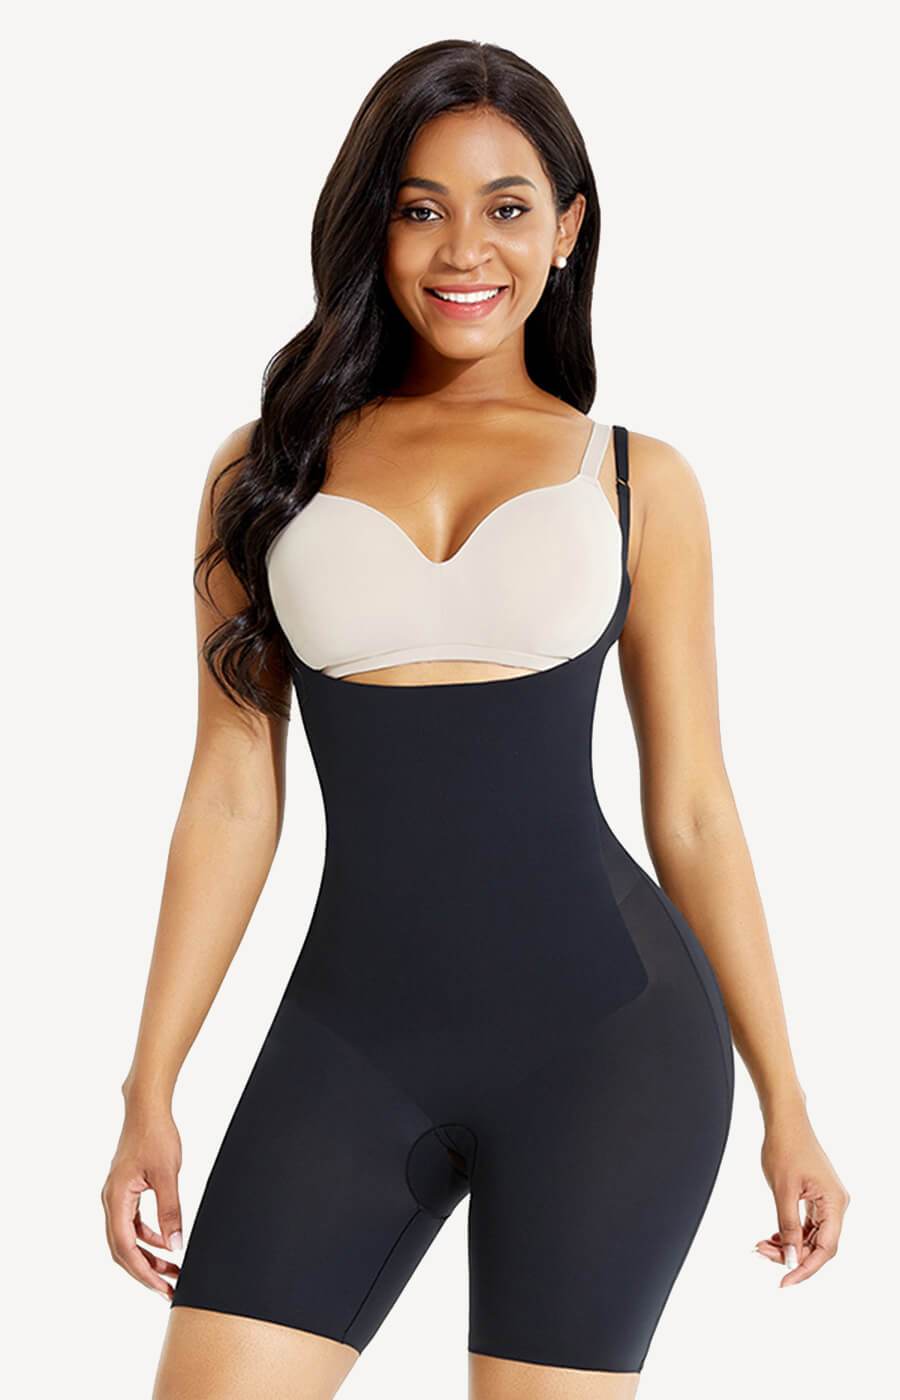 Loverbeauty Tummy Control Bodysuit Shapewear With Crotchless